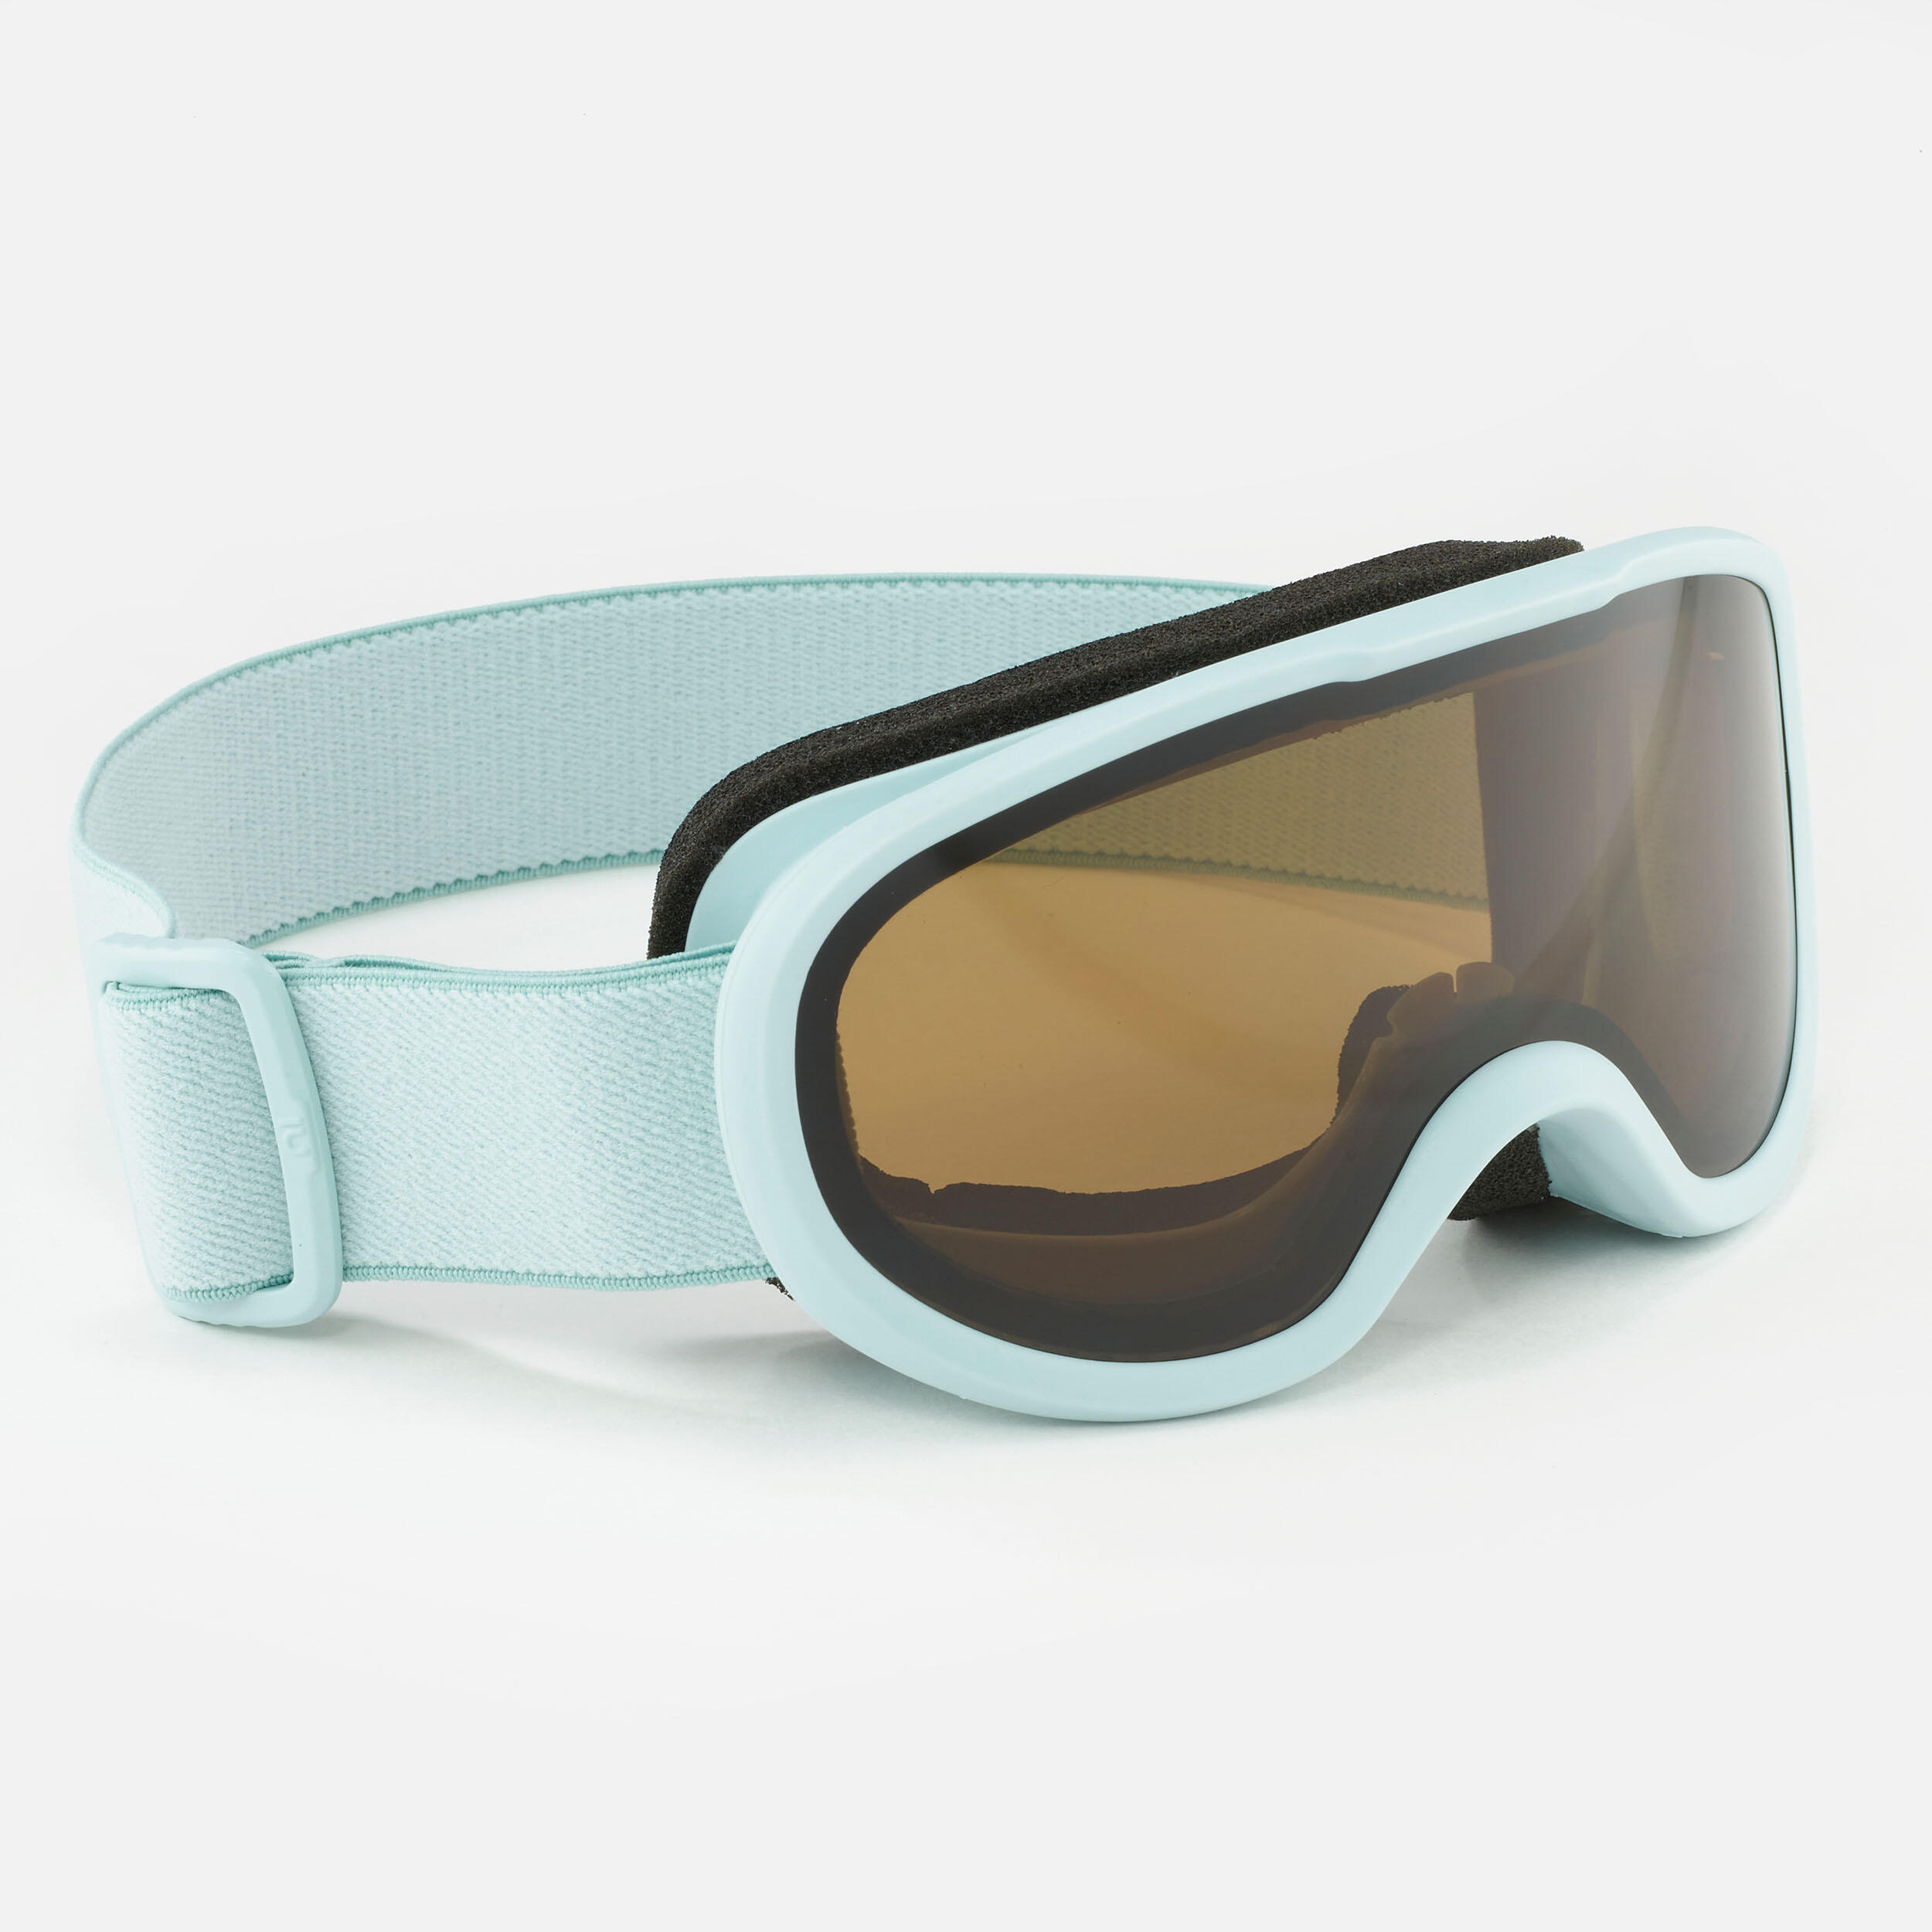 Kids’ ski goggles 12 to 36 months all weather category 3 turquoise 1/5